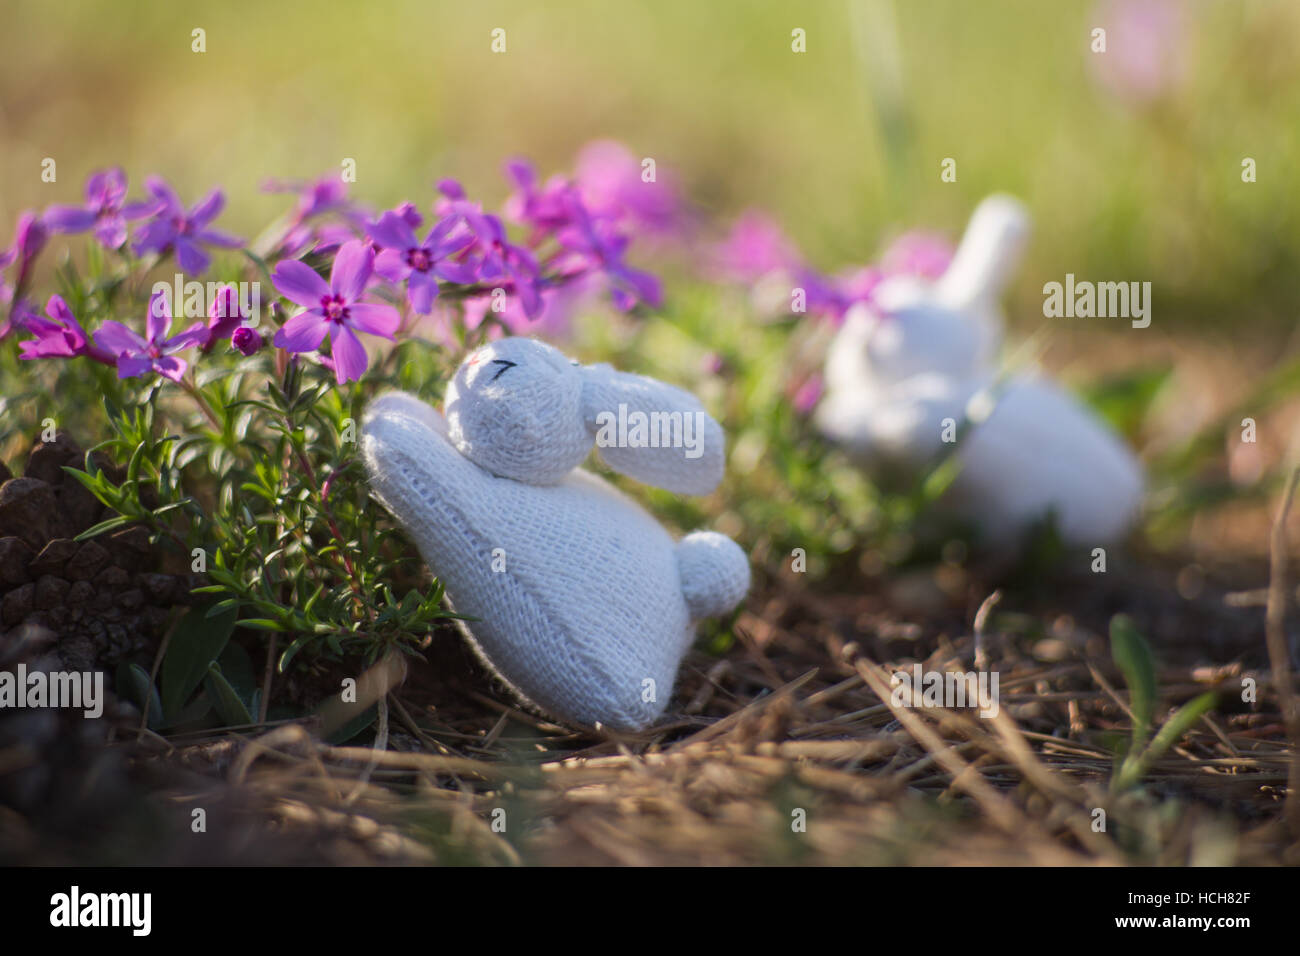 Two stuffed white rabbit toys posed to feed on clusters of purple flowers, one rabbit is de-focused Stock Photo